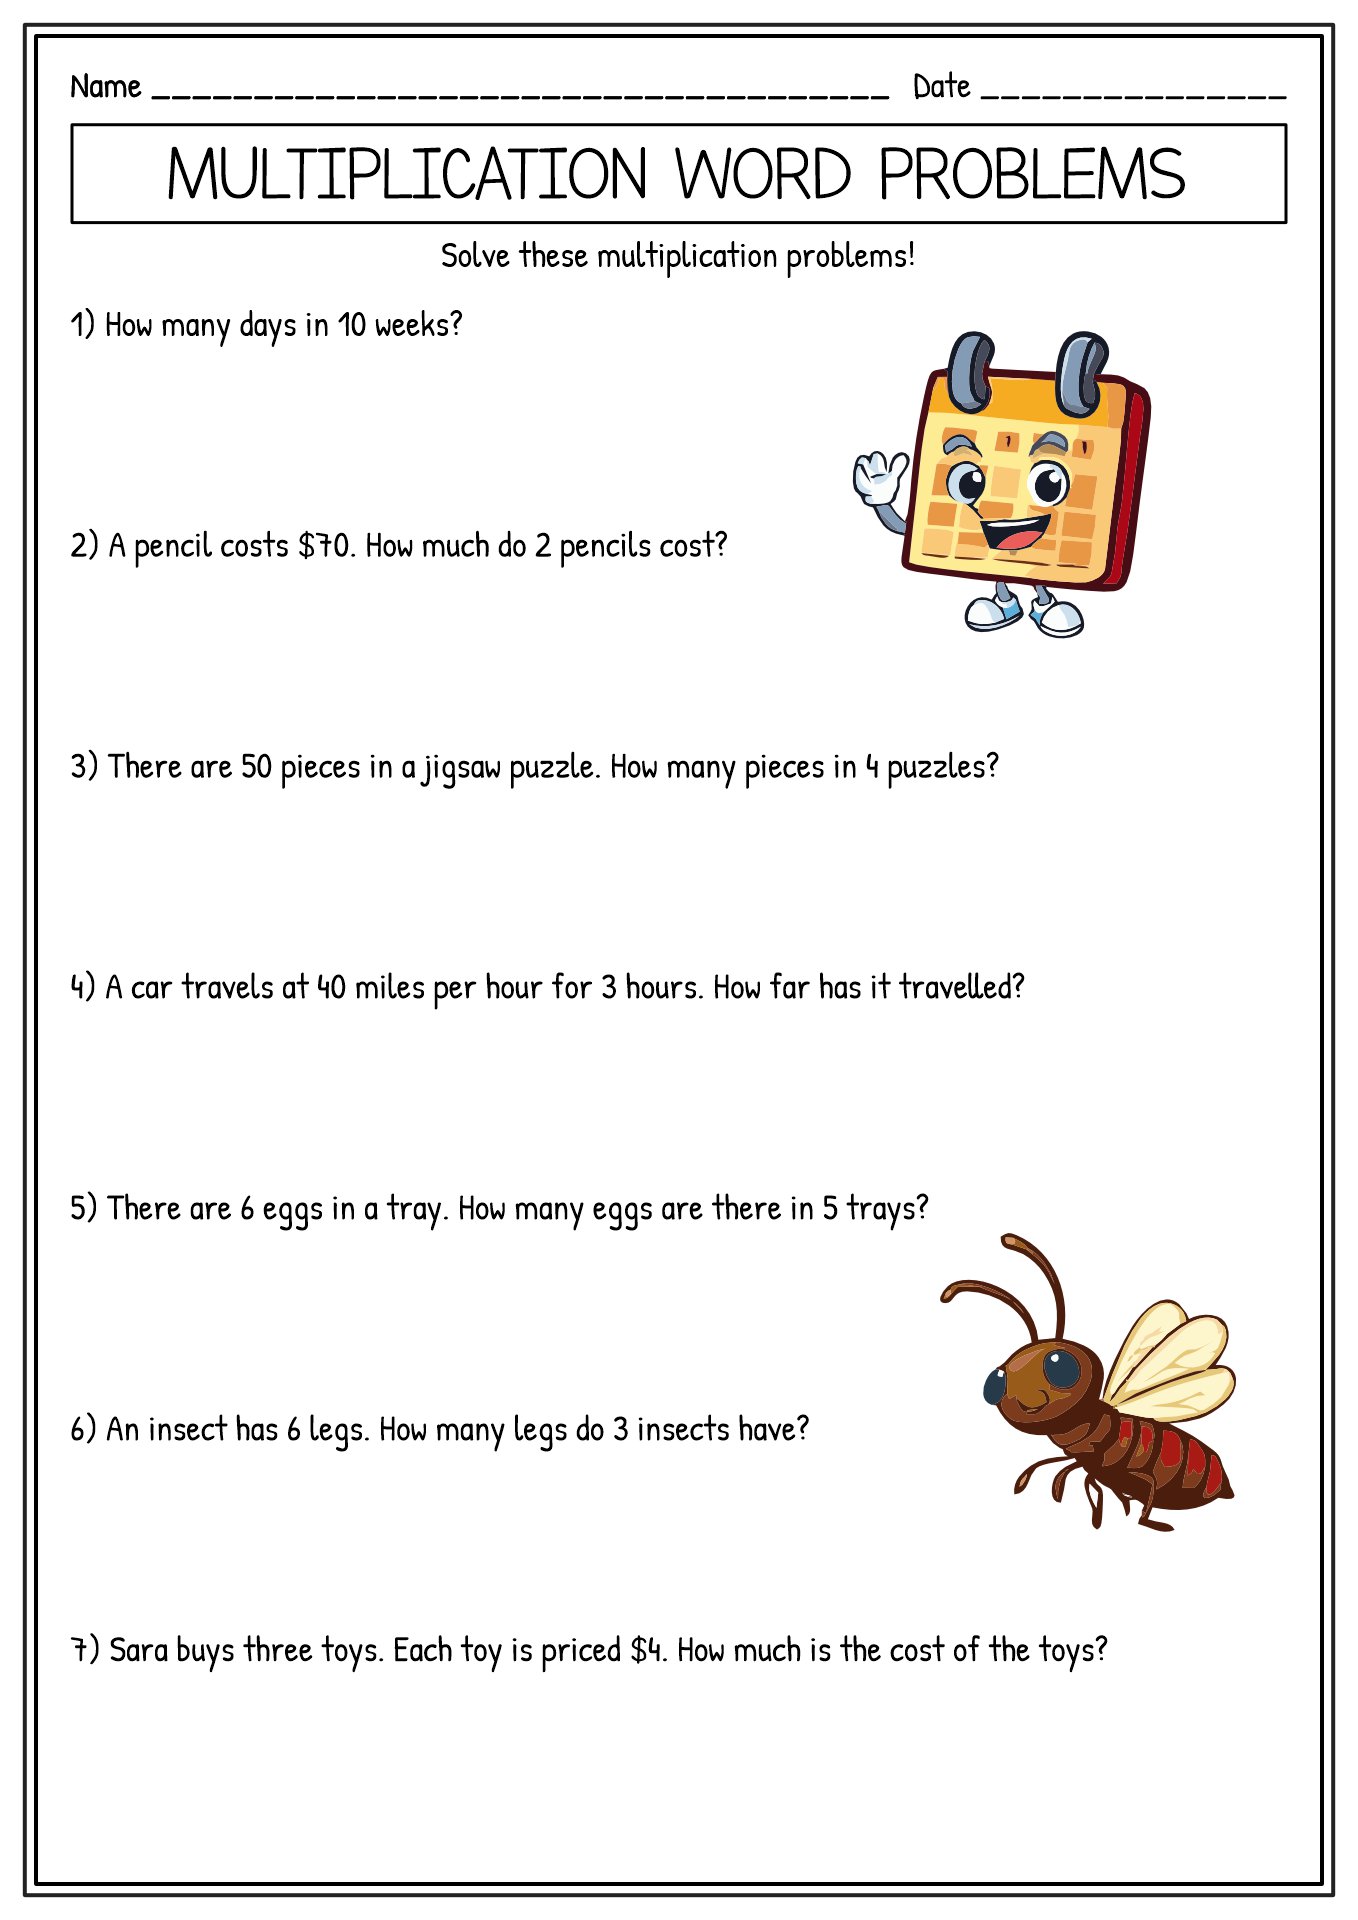 4th Grade Multiplication Word Problems Image